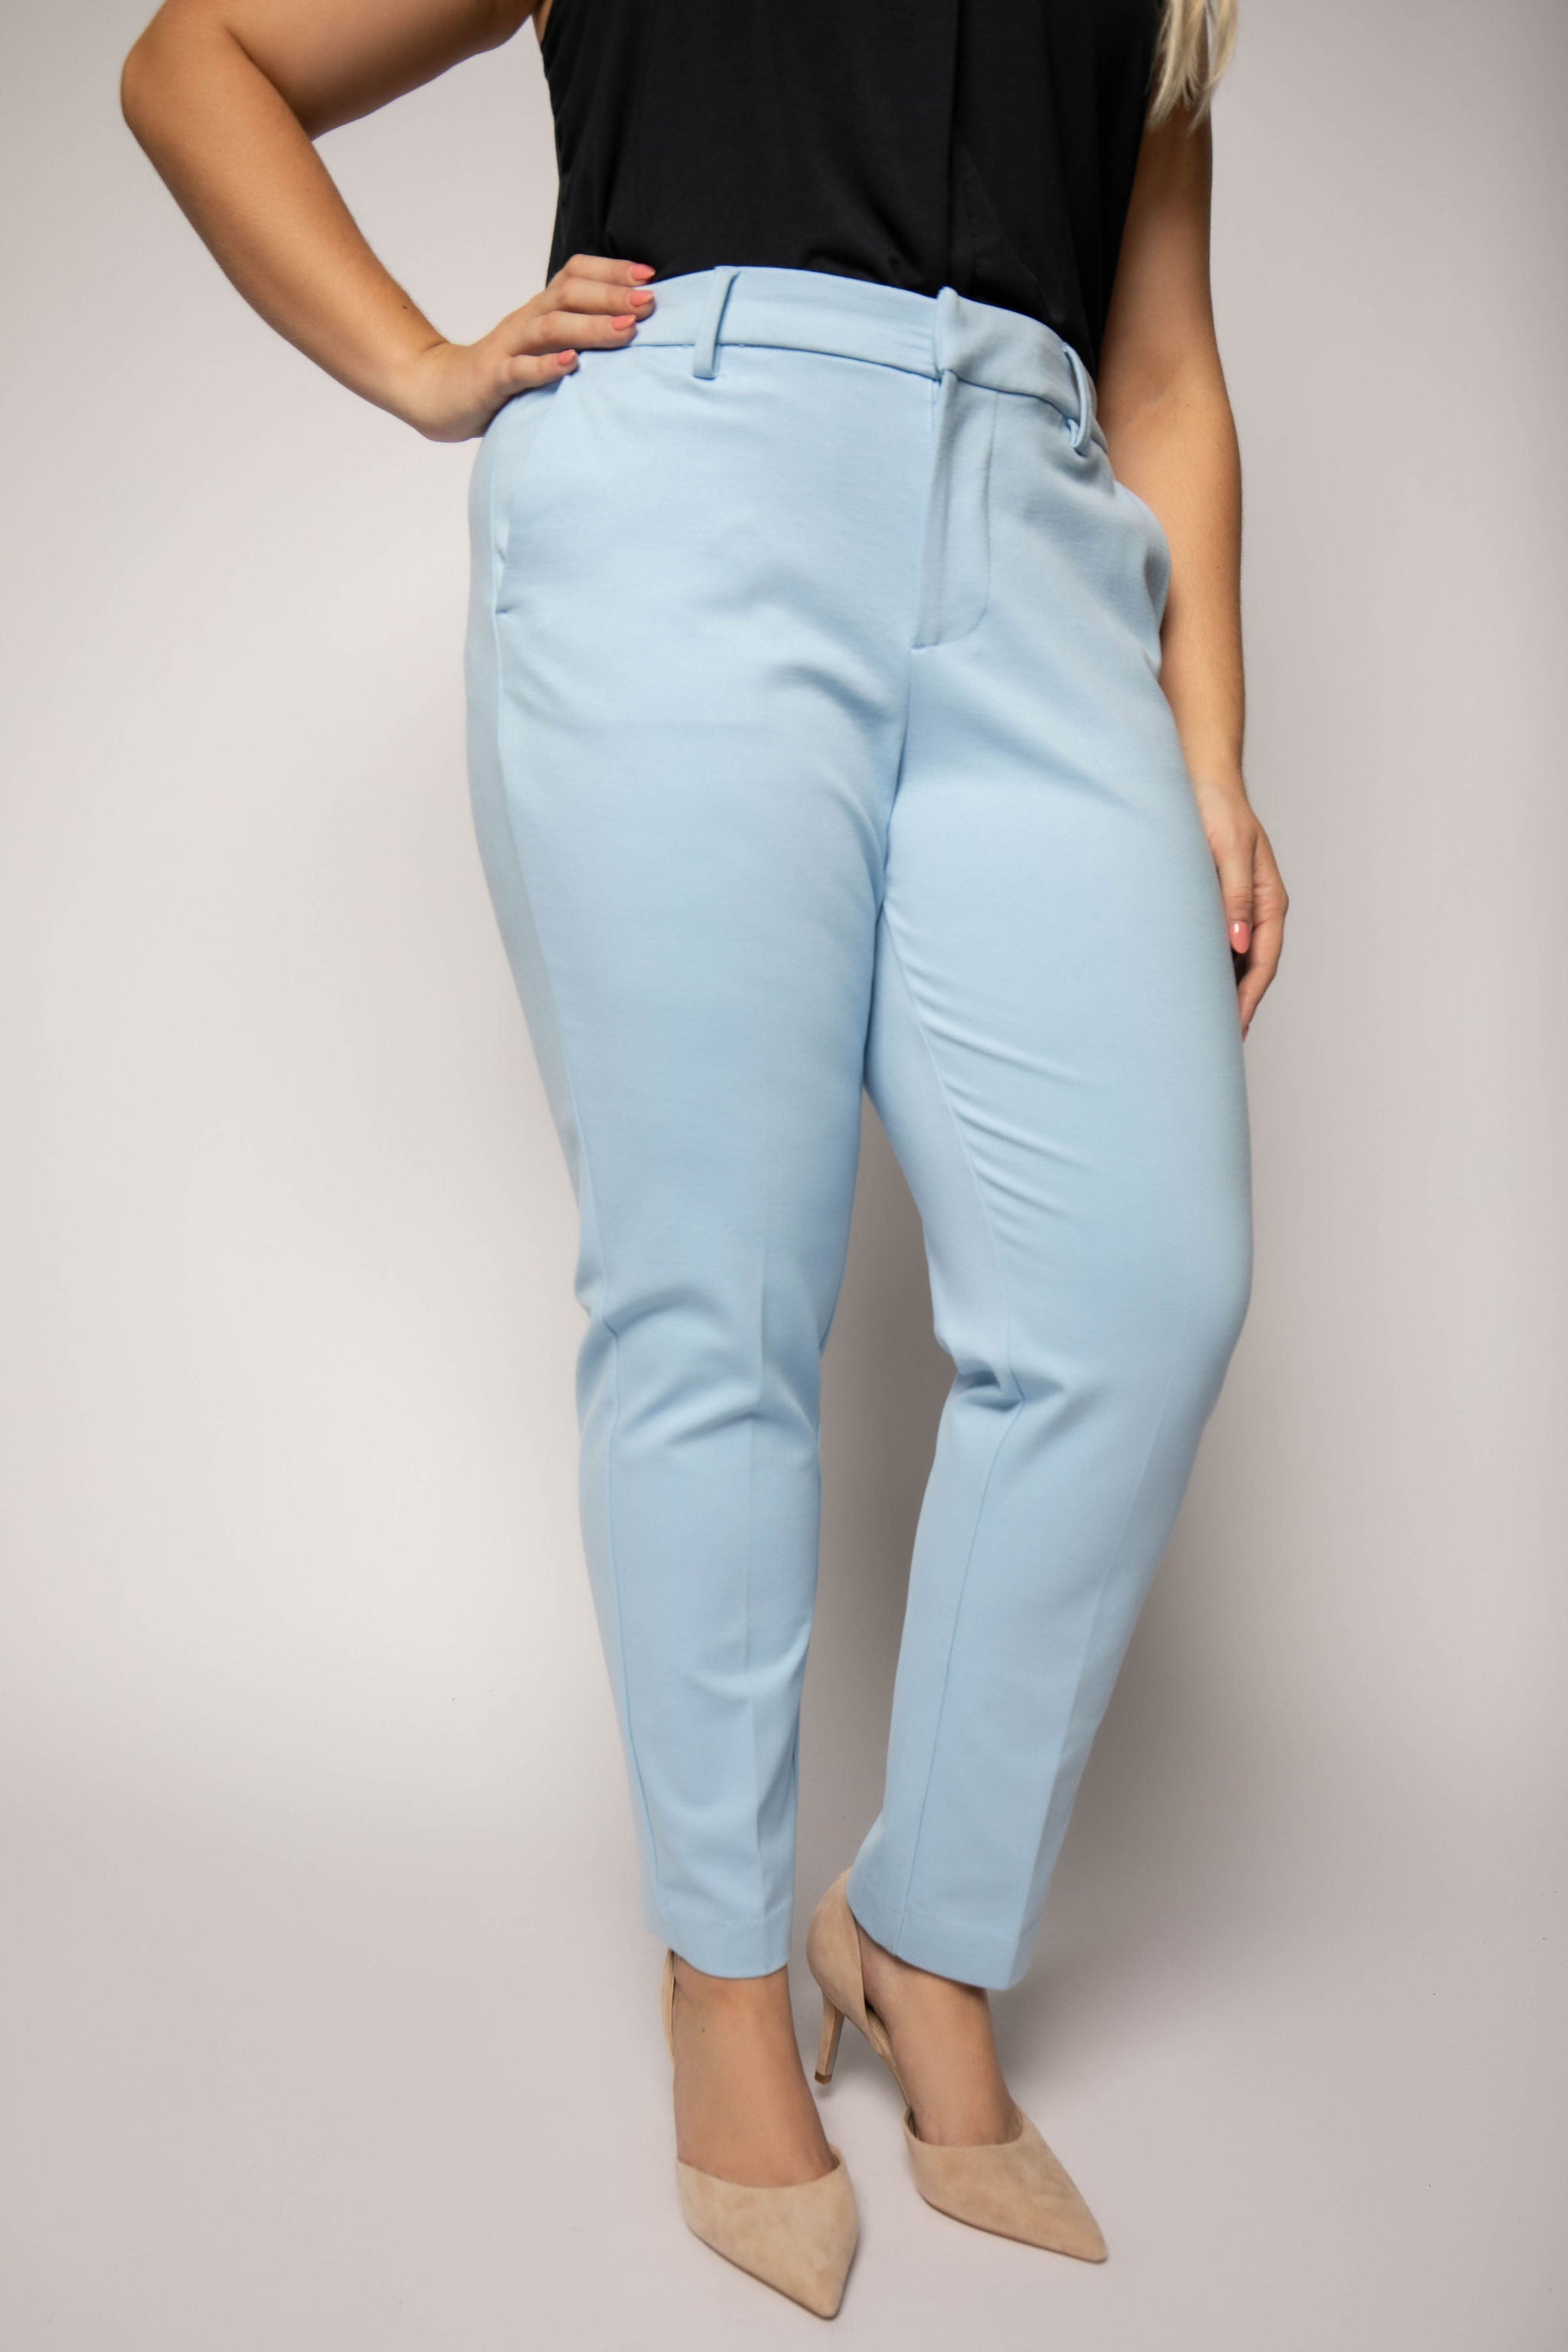 KELSEY TROUSER - AMOUR781